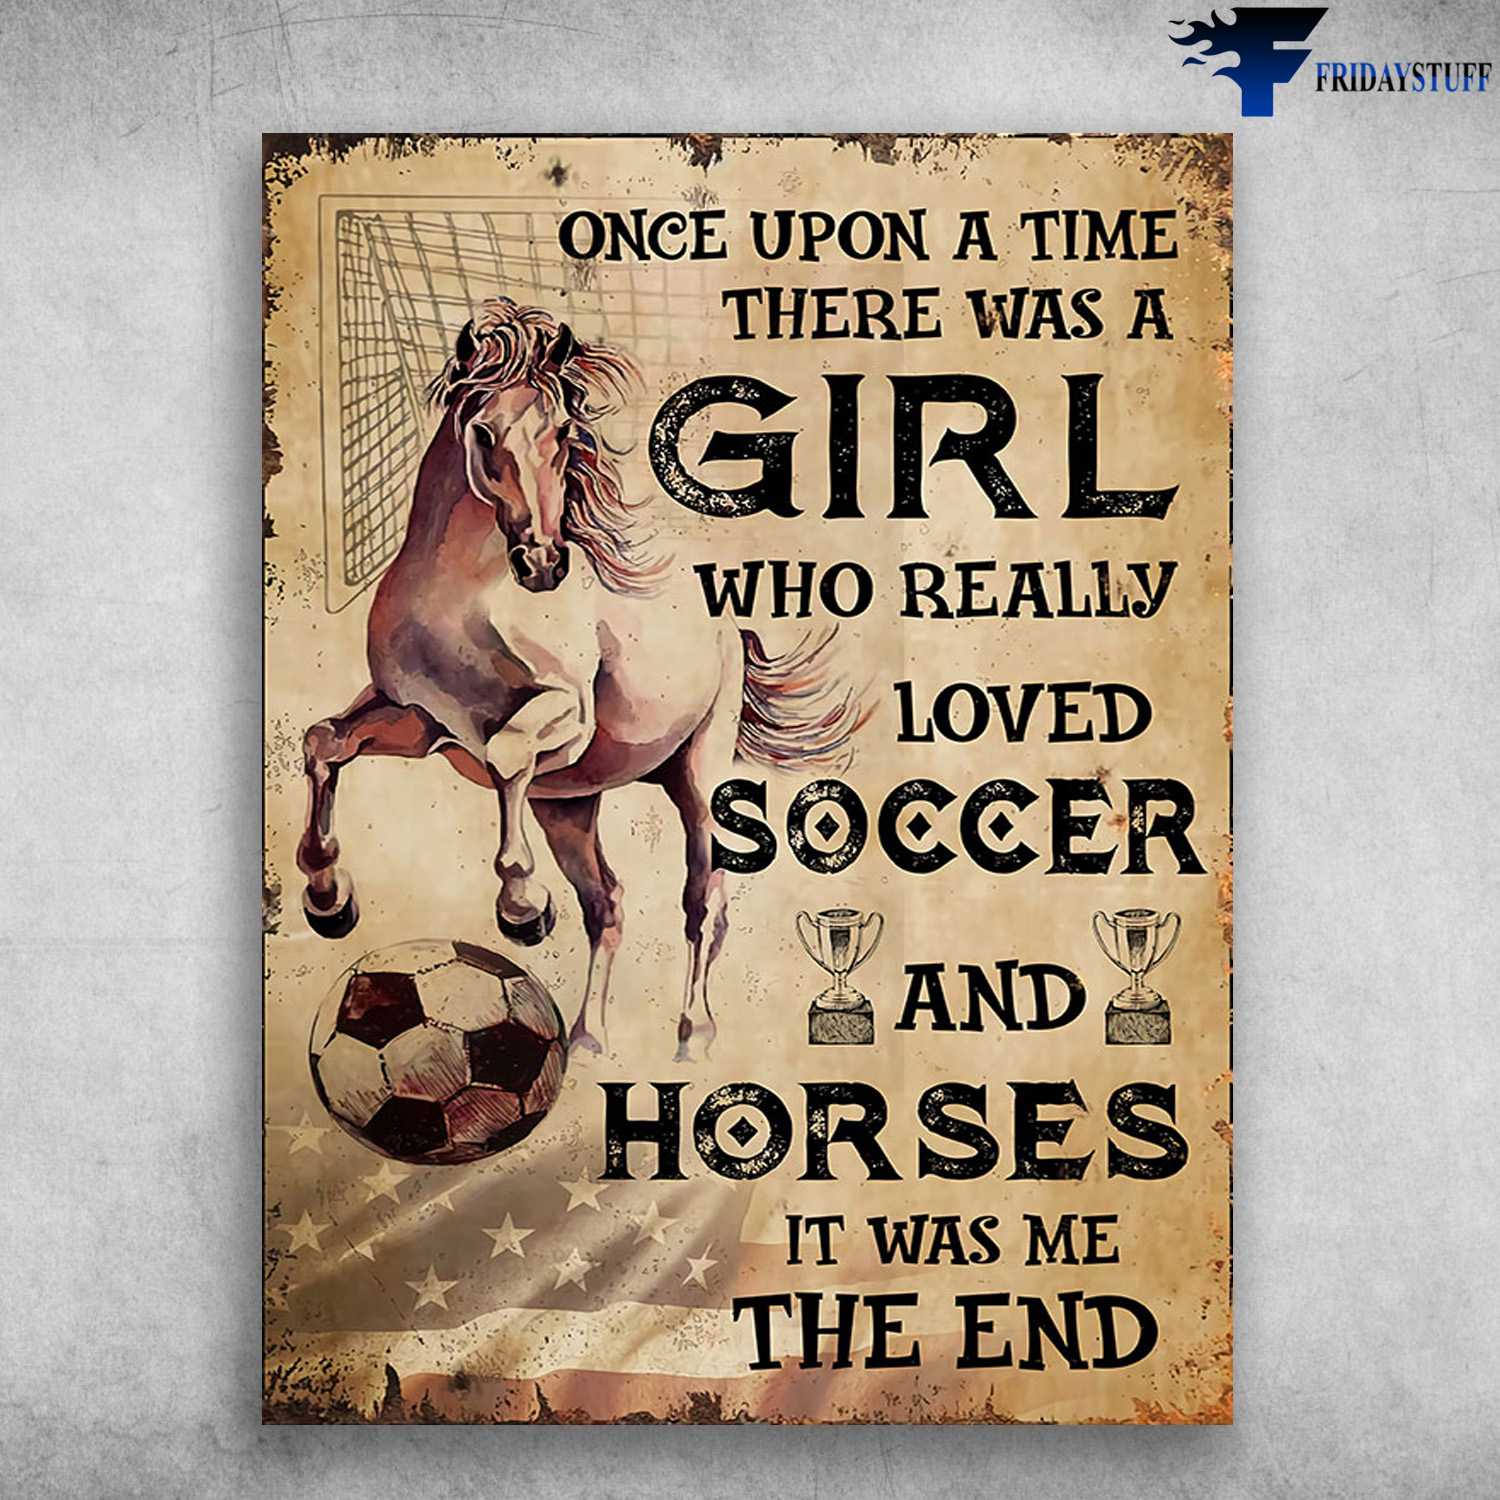 Horse Soccer, Football Lover - Once Upon A Time, There Was A Girl, Who Really Loved Soccer, And Horse, It Was Me, The End